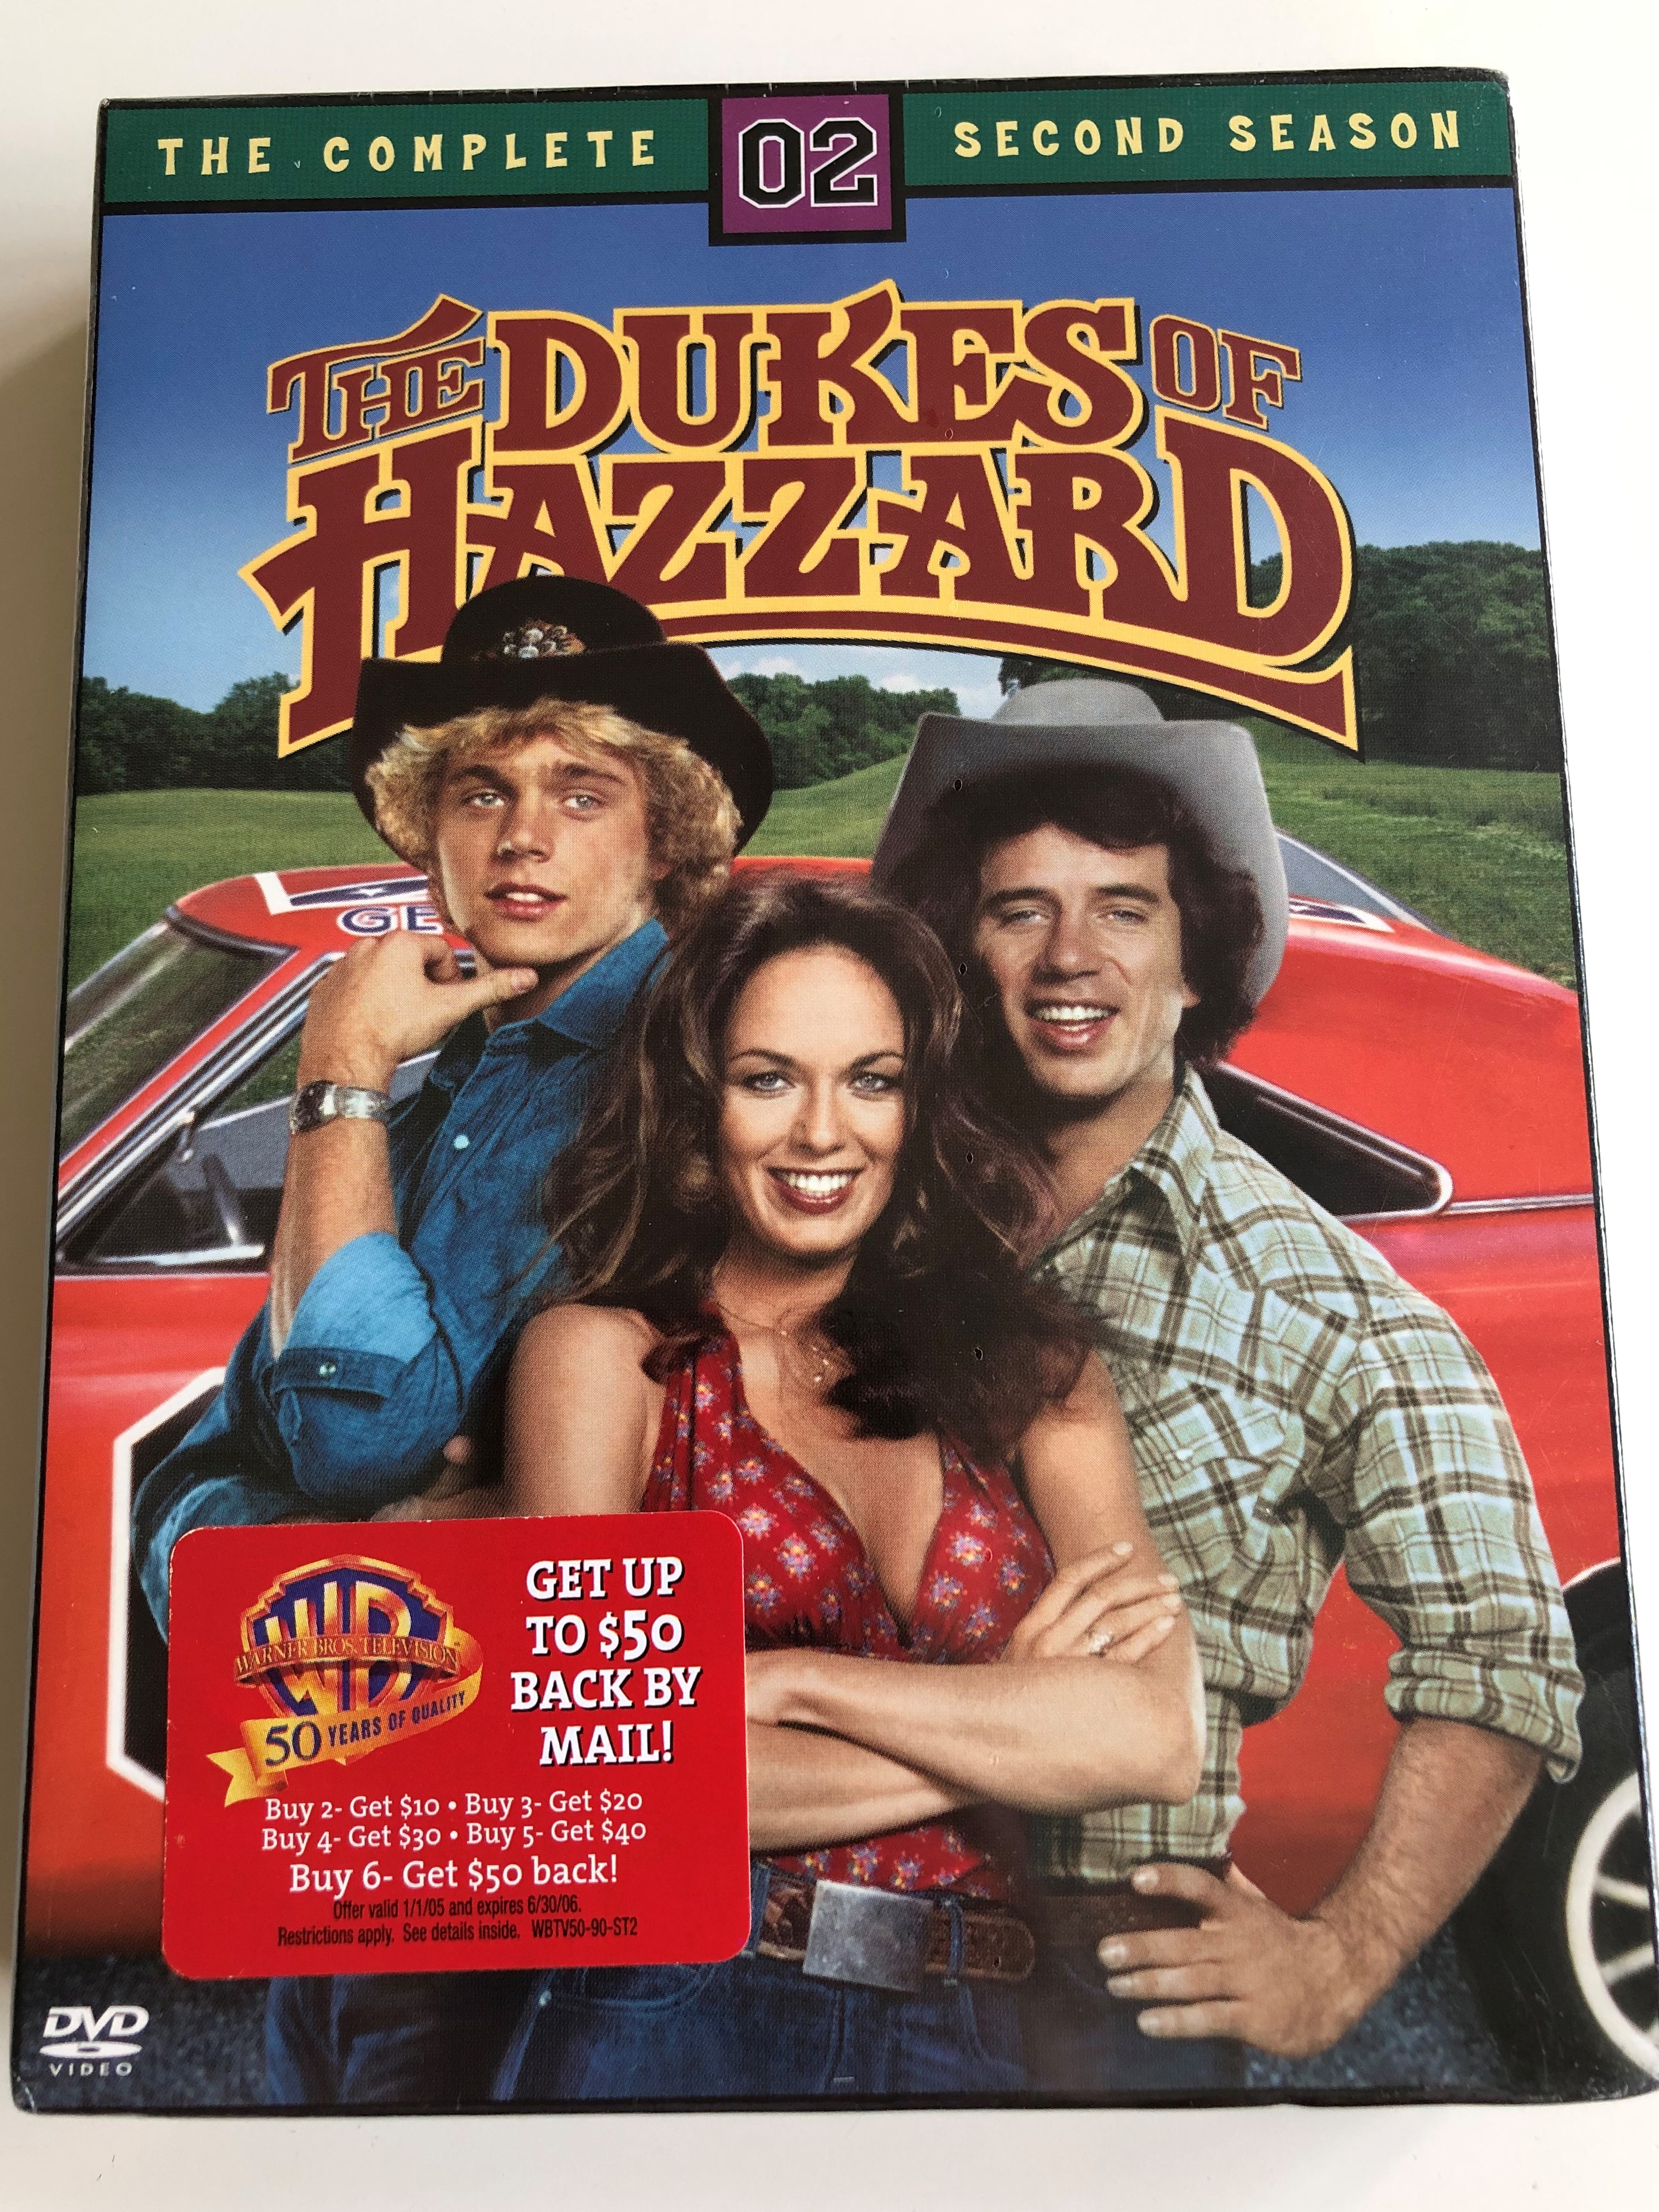 the-dukes-of-hazzard-dvd-box-set-1979-created-by-gy-waldron-jerry-rushing-starring-tom-wopat-john-schneider-catherine-bach-denver-pyle-the-complete-season-2.-4-discs-23-episodes-1-.jpg